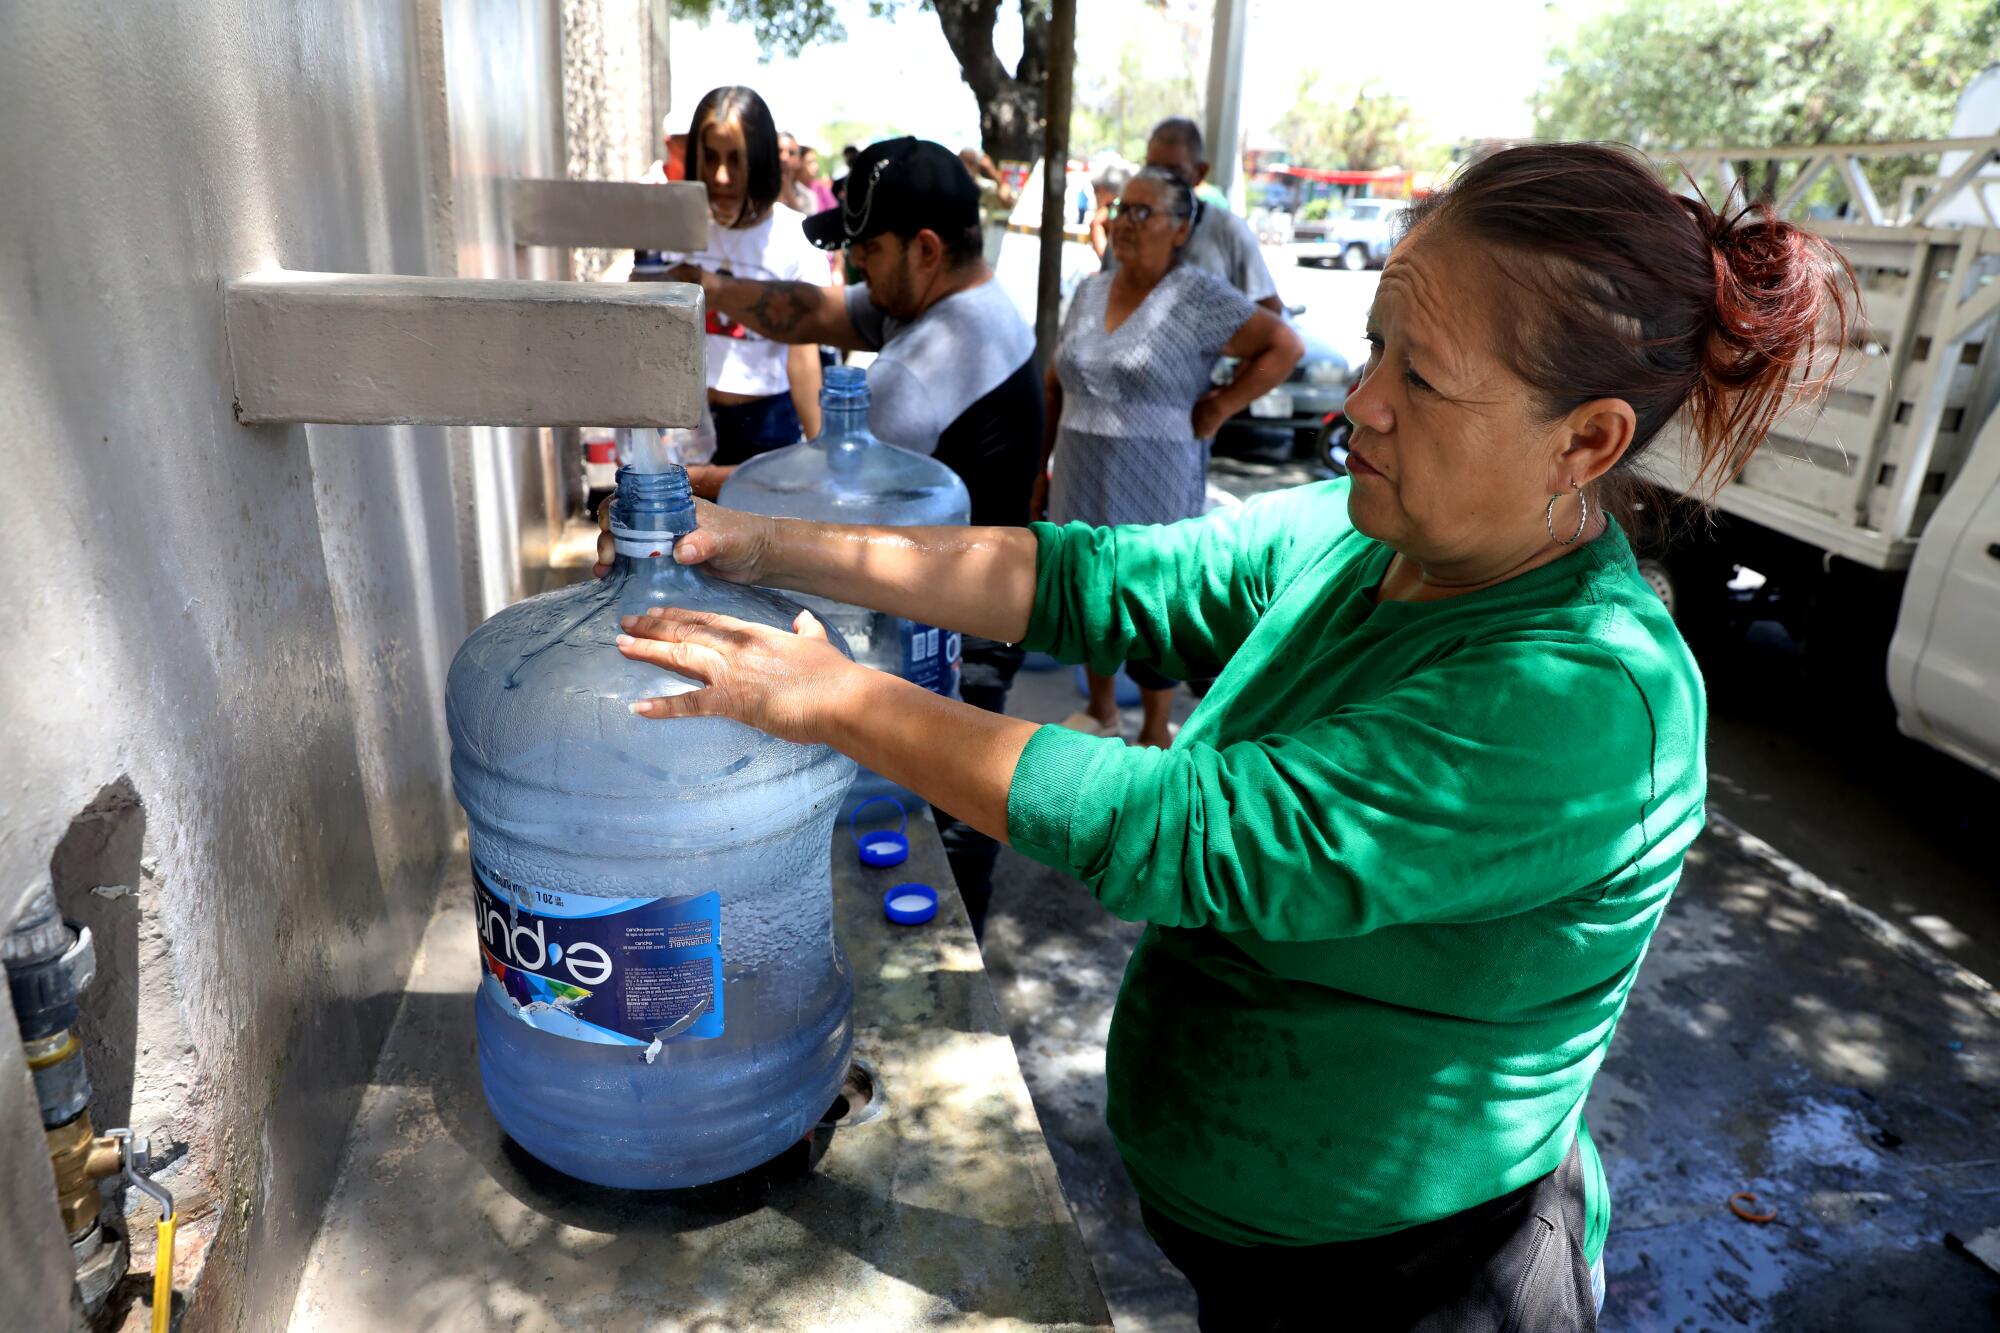 Drought leaves Mexico's second biggest city without water - Los